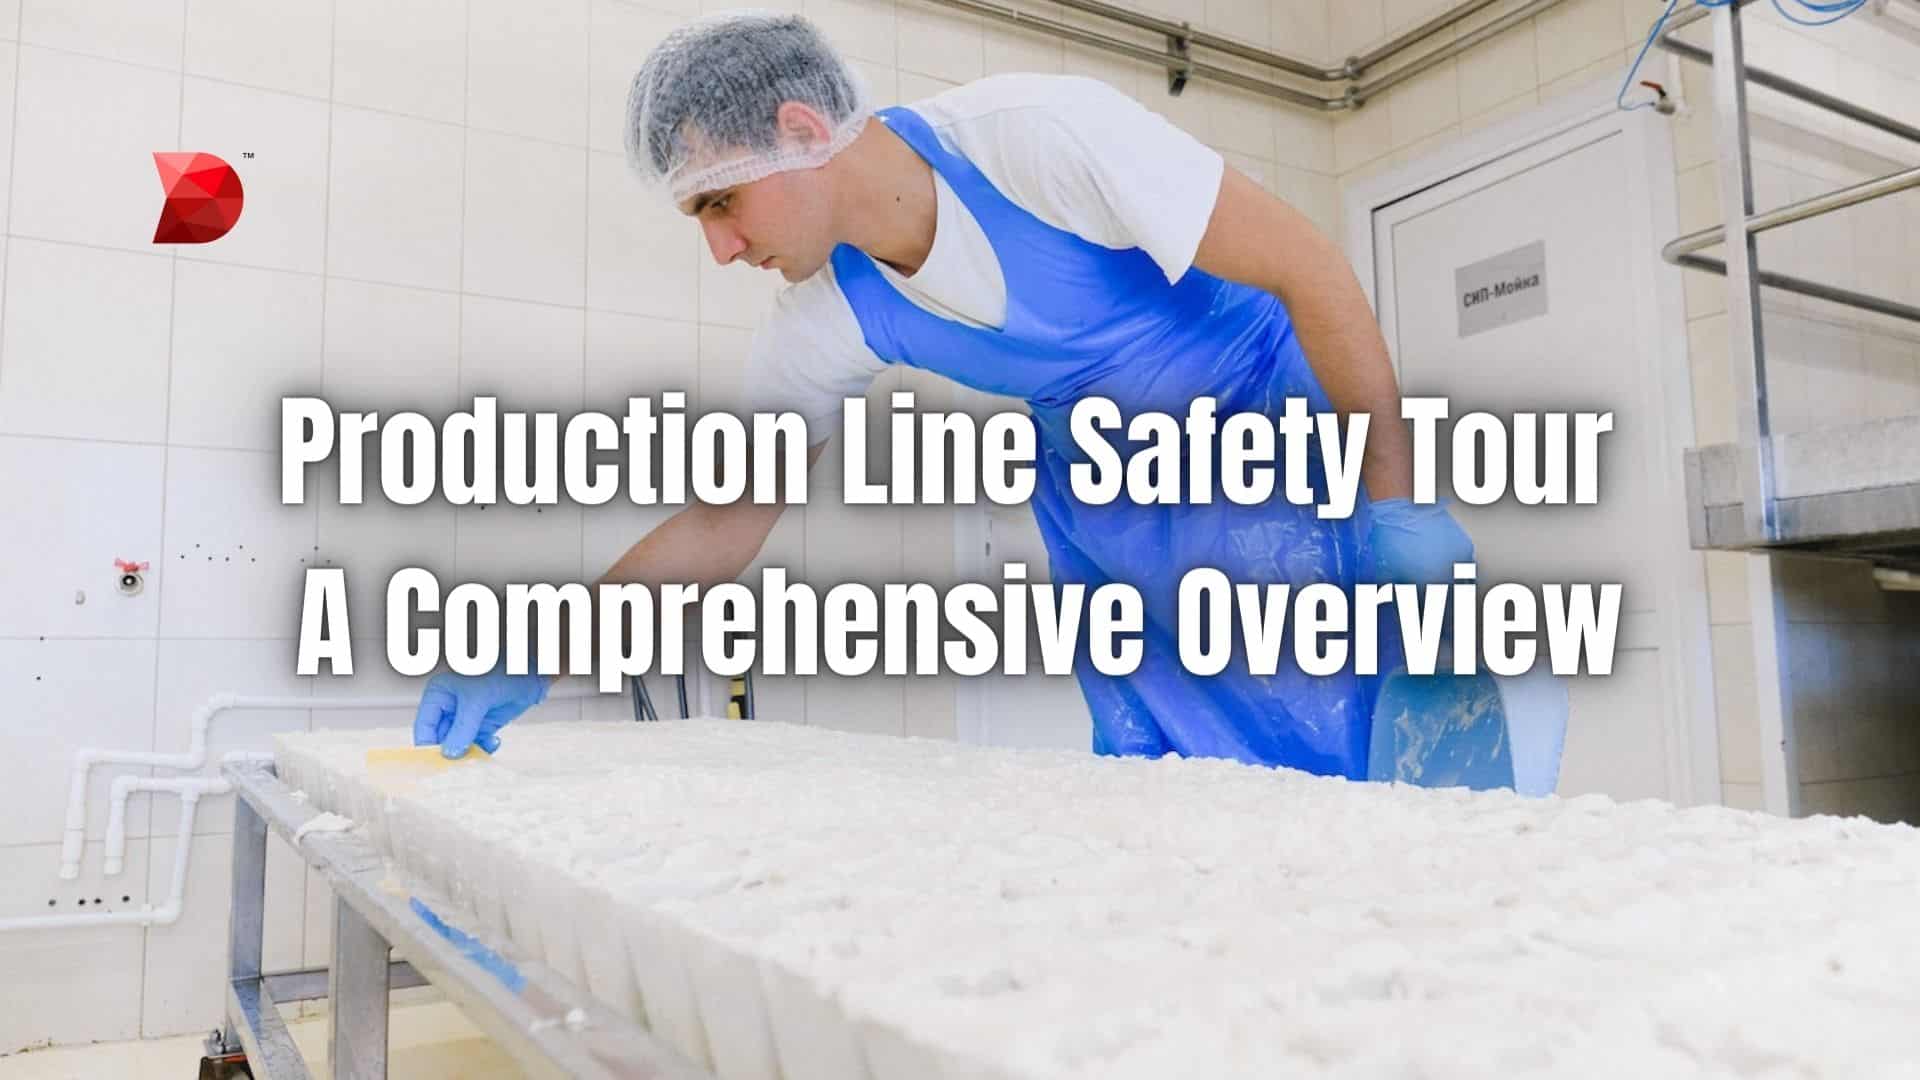 Production Line Safety Tour - A Comprehensive Overview